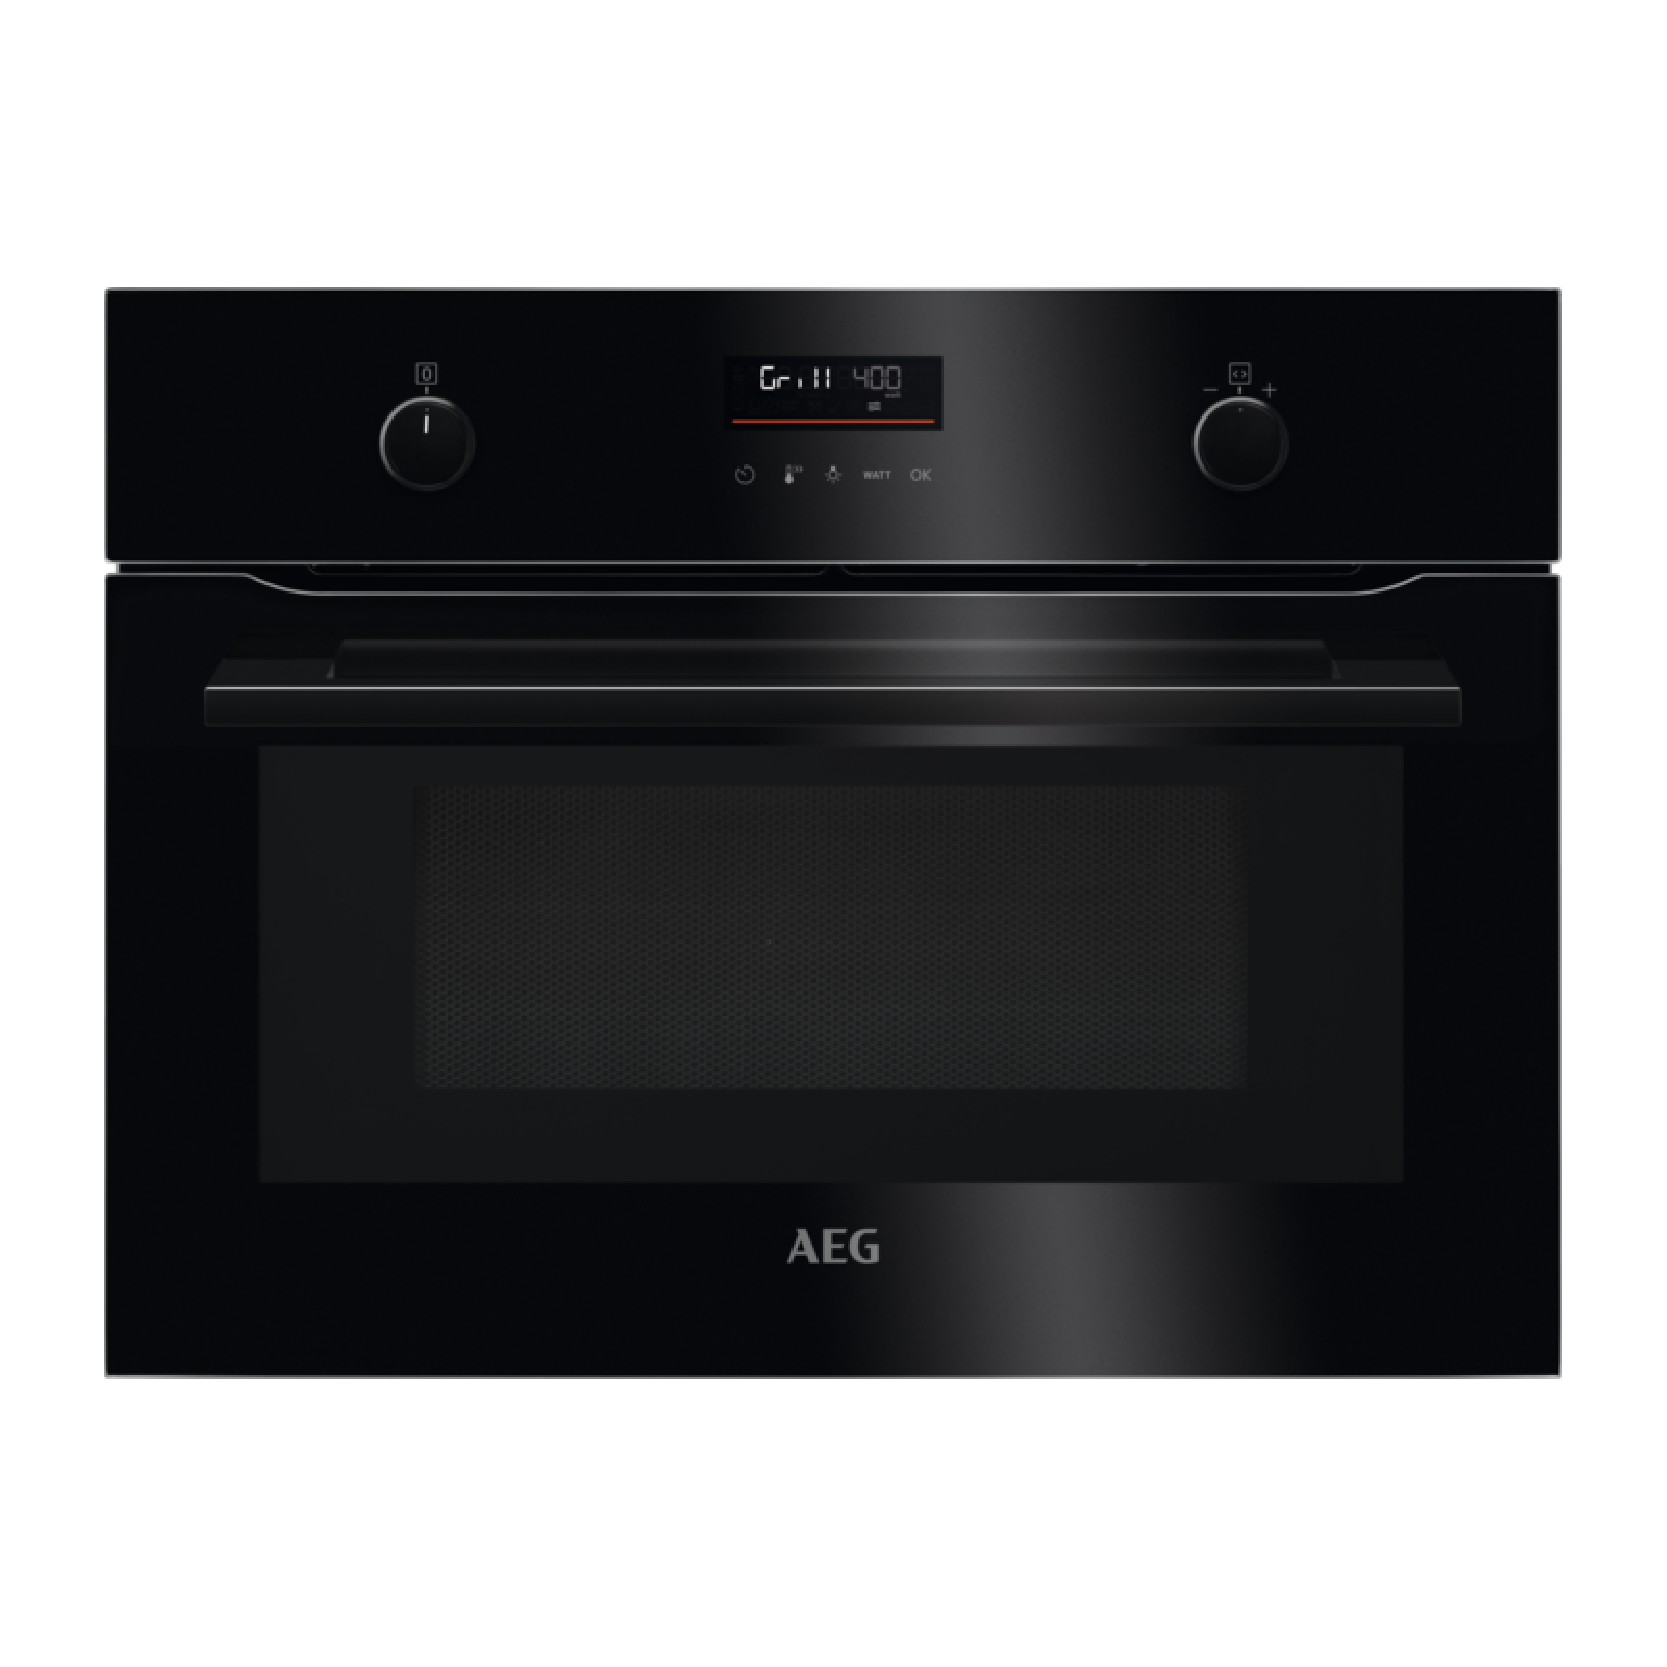 COMBIQUICK COMPACT MULTIFUNCTION OVEN WITH MICROWAVE AND ROTARY CONTROLS | KMK565060B